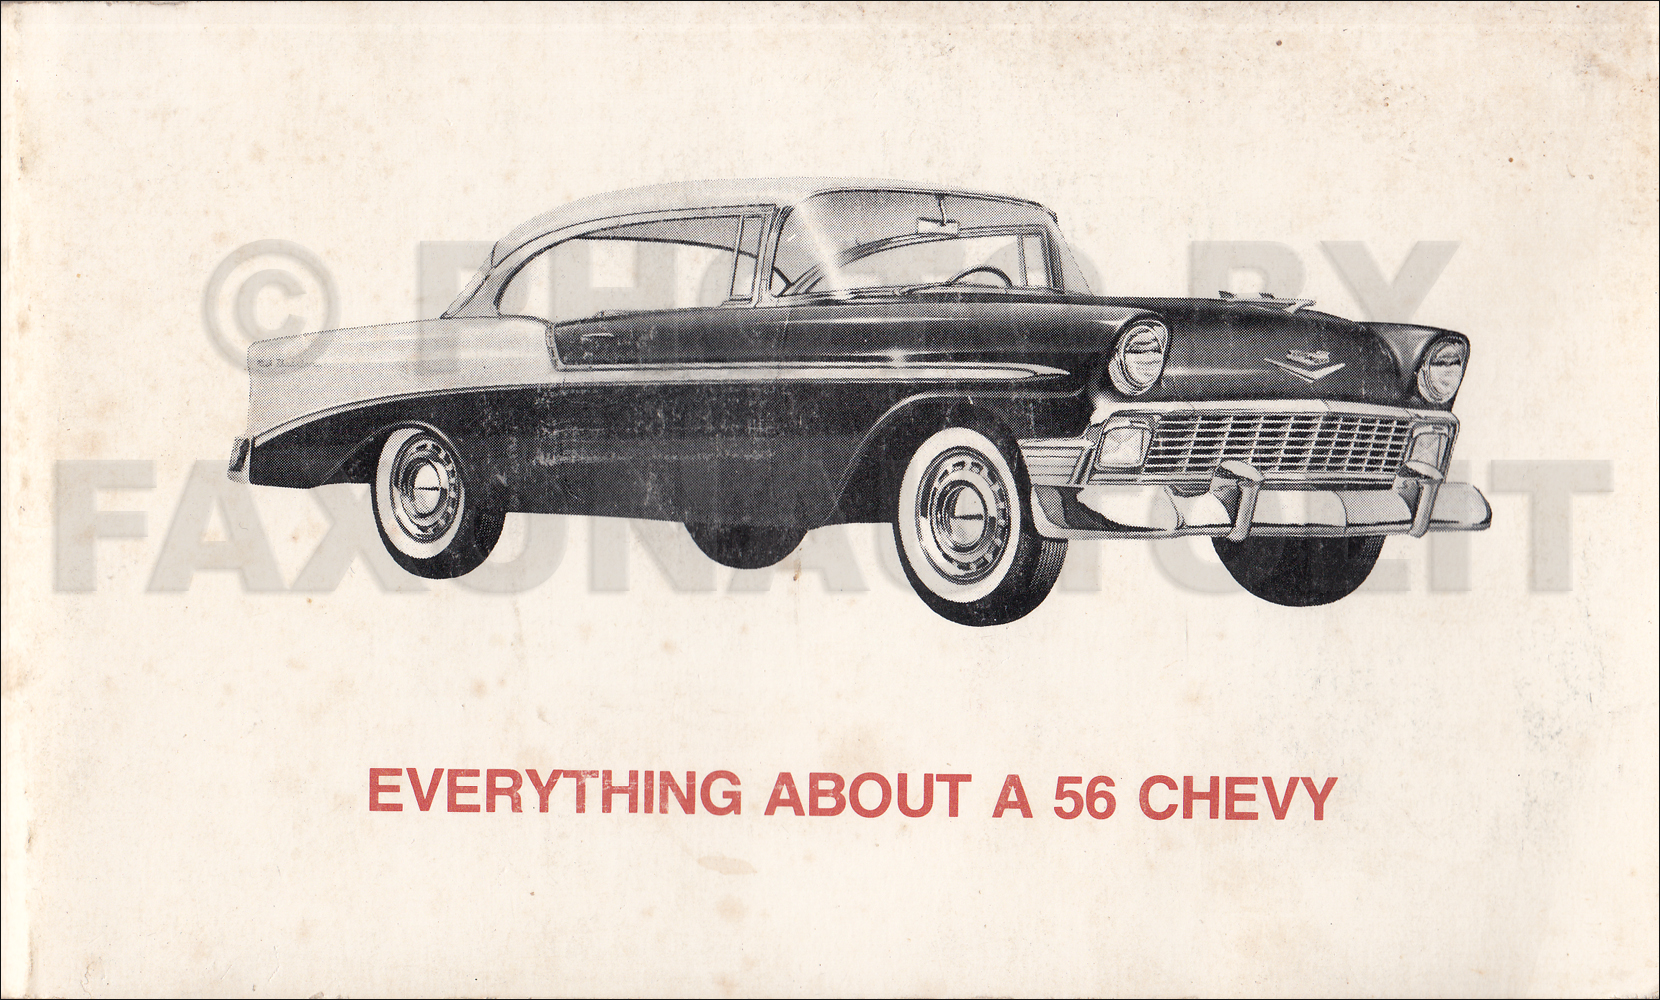 1956 Chevrolet Car Finger Tip Facts Book Dealer Album Reprint "Everything About A 56 Chevy"